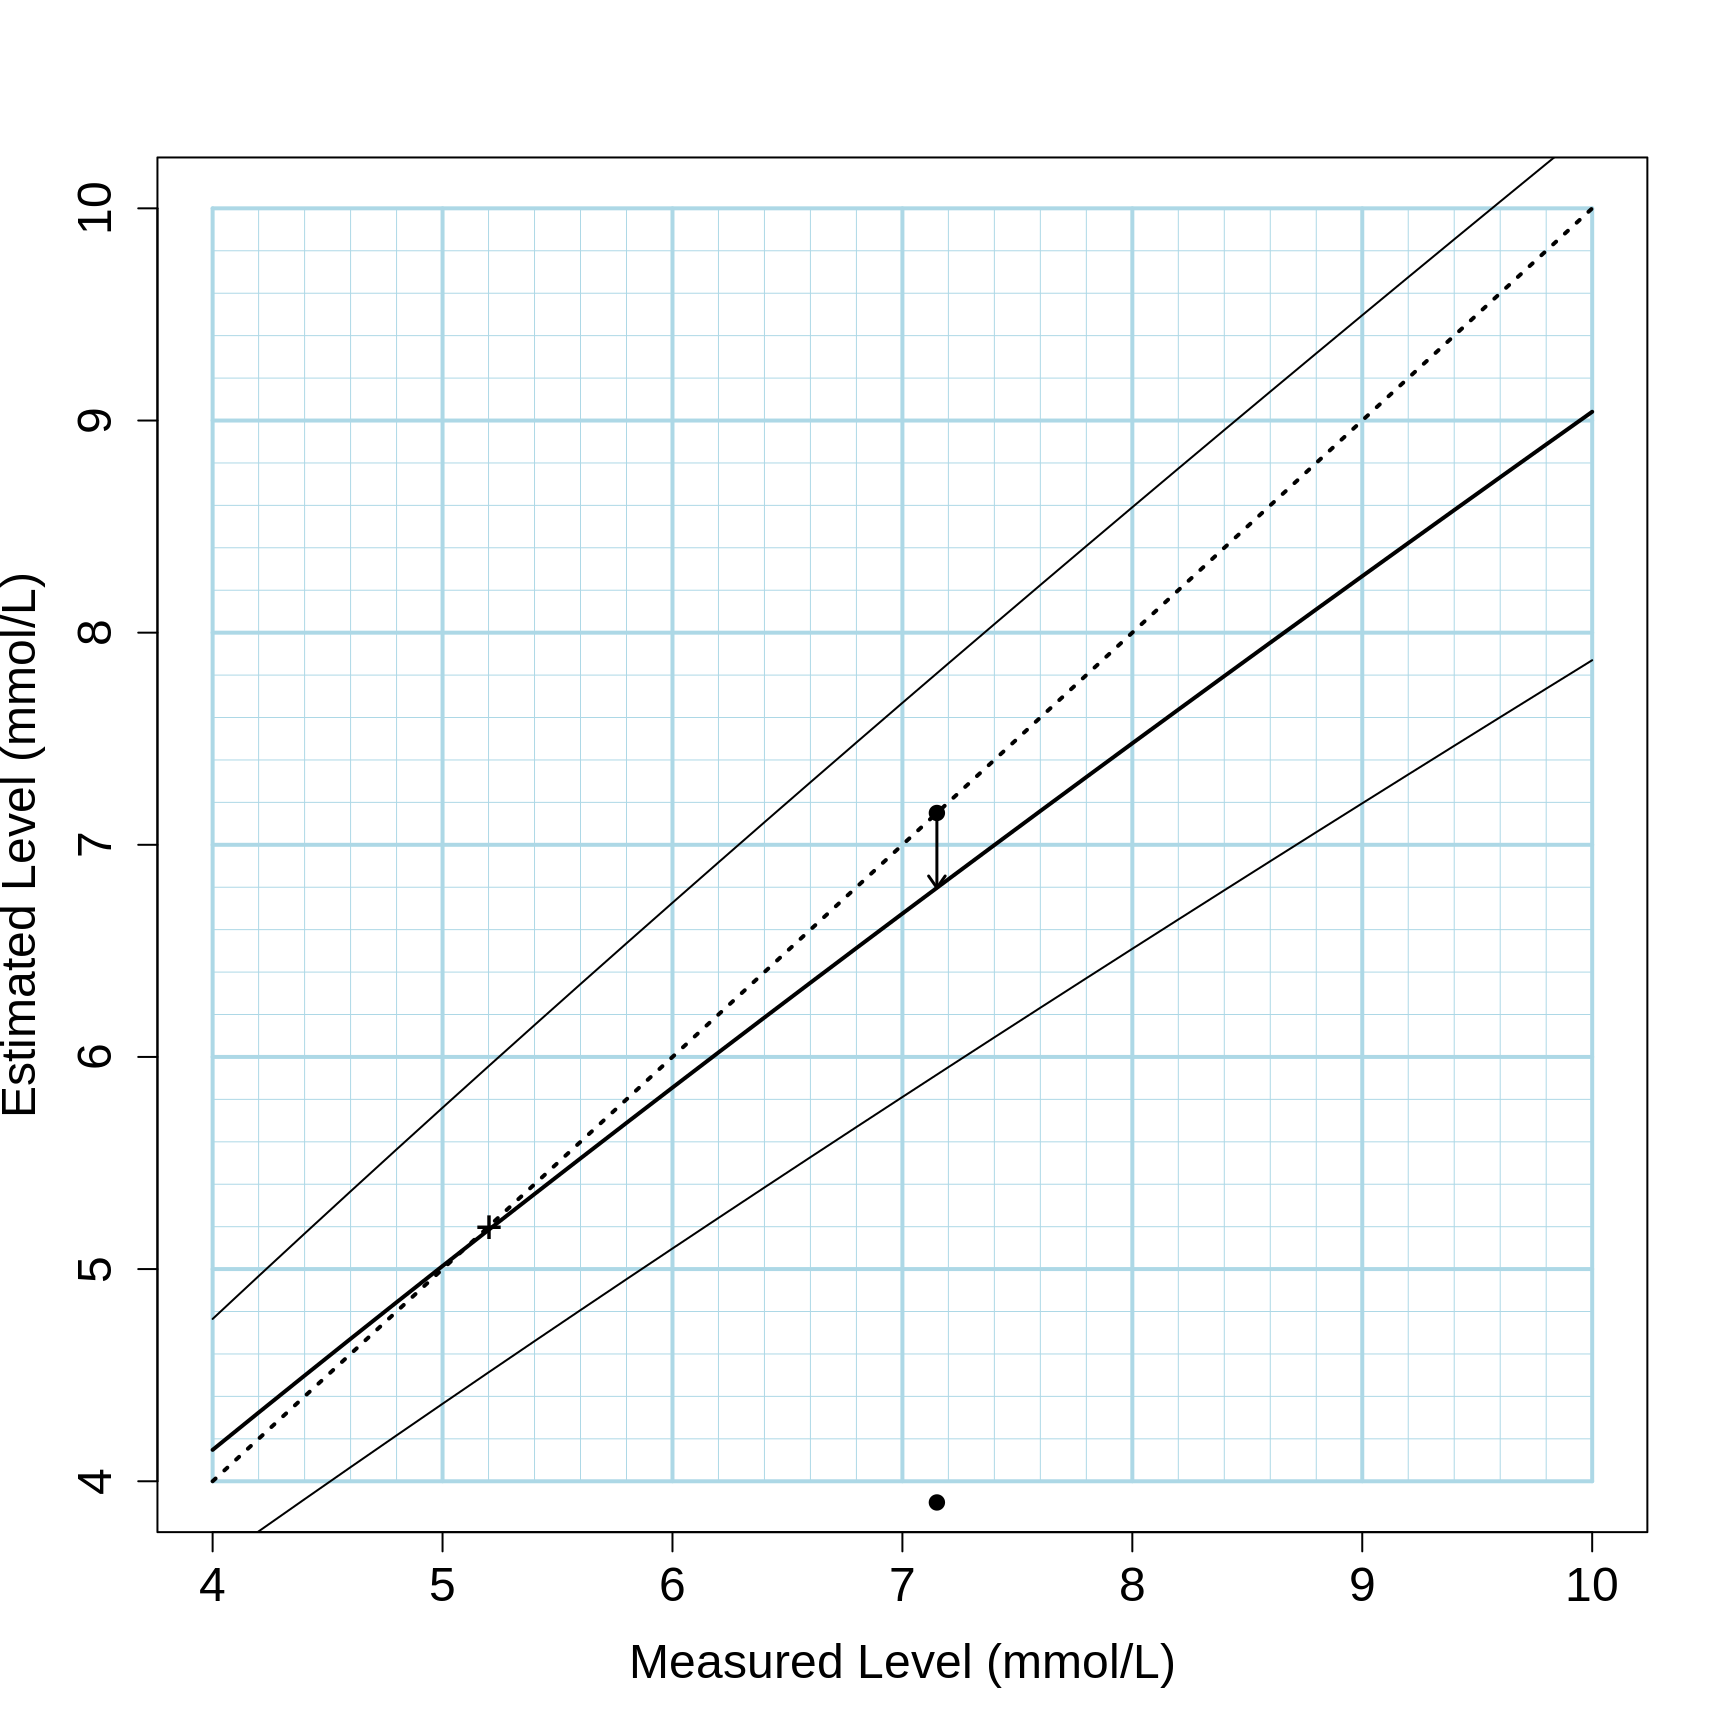 A Person's estimated true cholesterol level from one measurement for a population of individuals where the mean is 5.2 mmol/L (i.e, at the time of the article, men less than 35 and women less than 45 years old). The thicker solid line indicates the estimated true level, the  thinner solid lines are 80% confidence intervals. The dotted diagonal line is an equivalence line. The arrow shows the amount by which a single measurement of 7.15 mmol/L is shrunk towards the population mean, to a rcorrected value of 6.8 mmol/L.